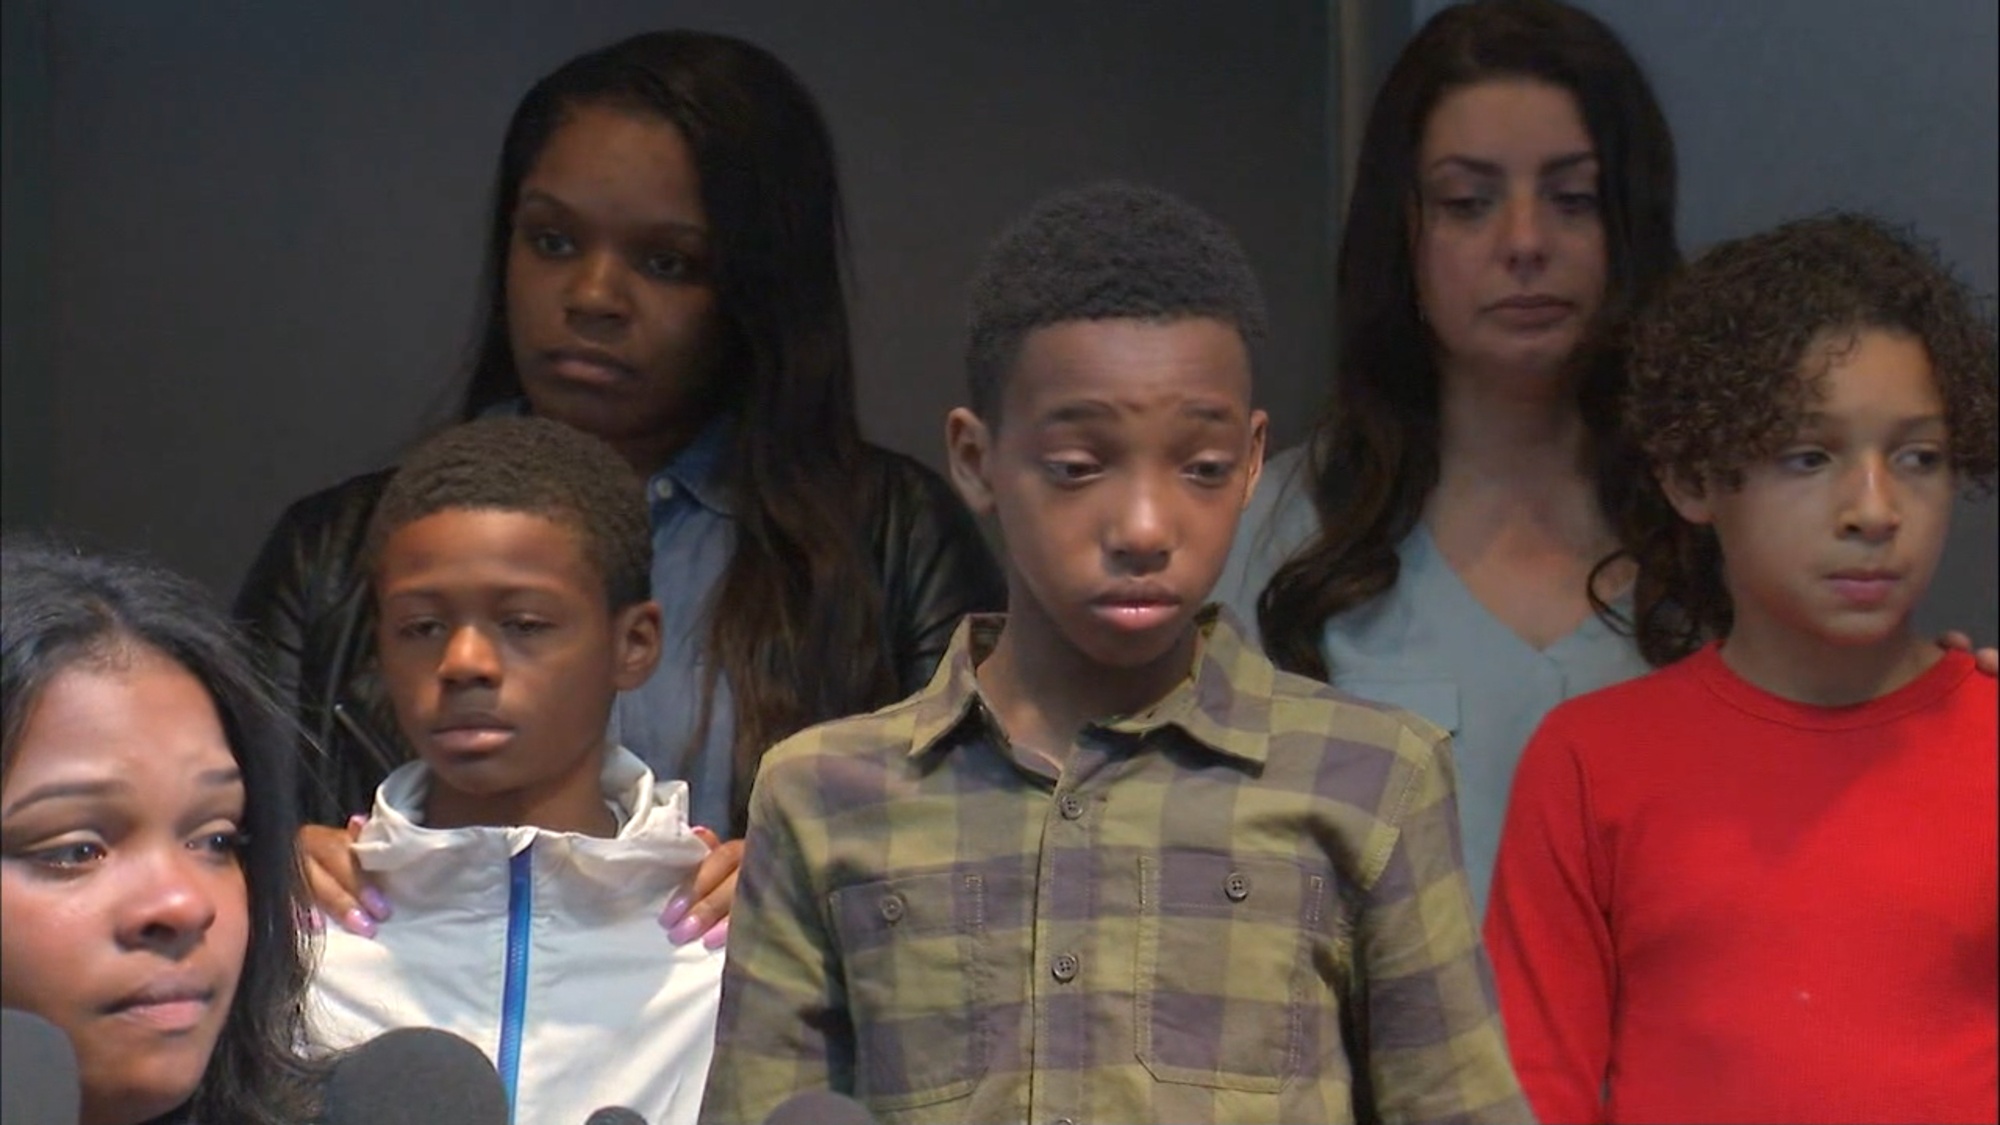 PHOTO: Friends and family members listen as Ashley Smith, lower left, talks about an allegedly racist incident at a Buffalo Wild Wings in Naperville, Ill., during a press conference on Nov. 5, 2019.